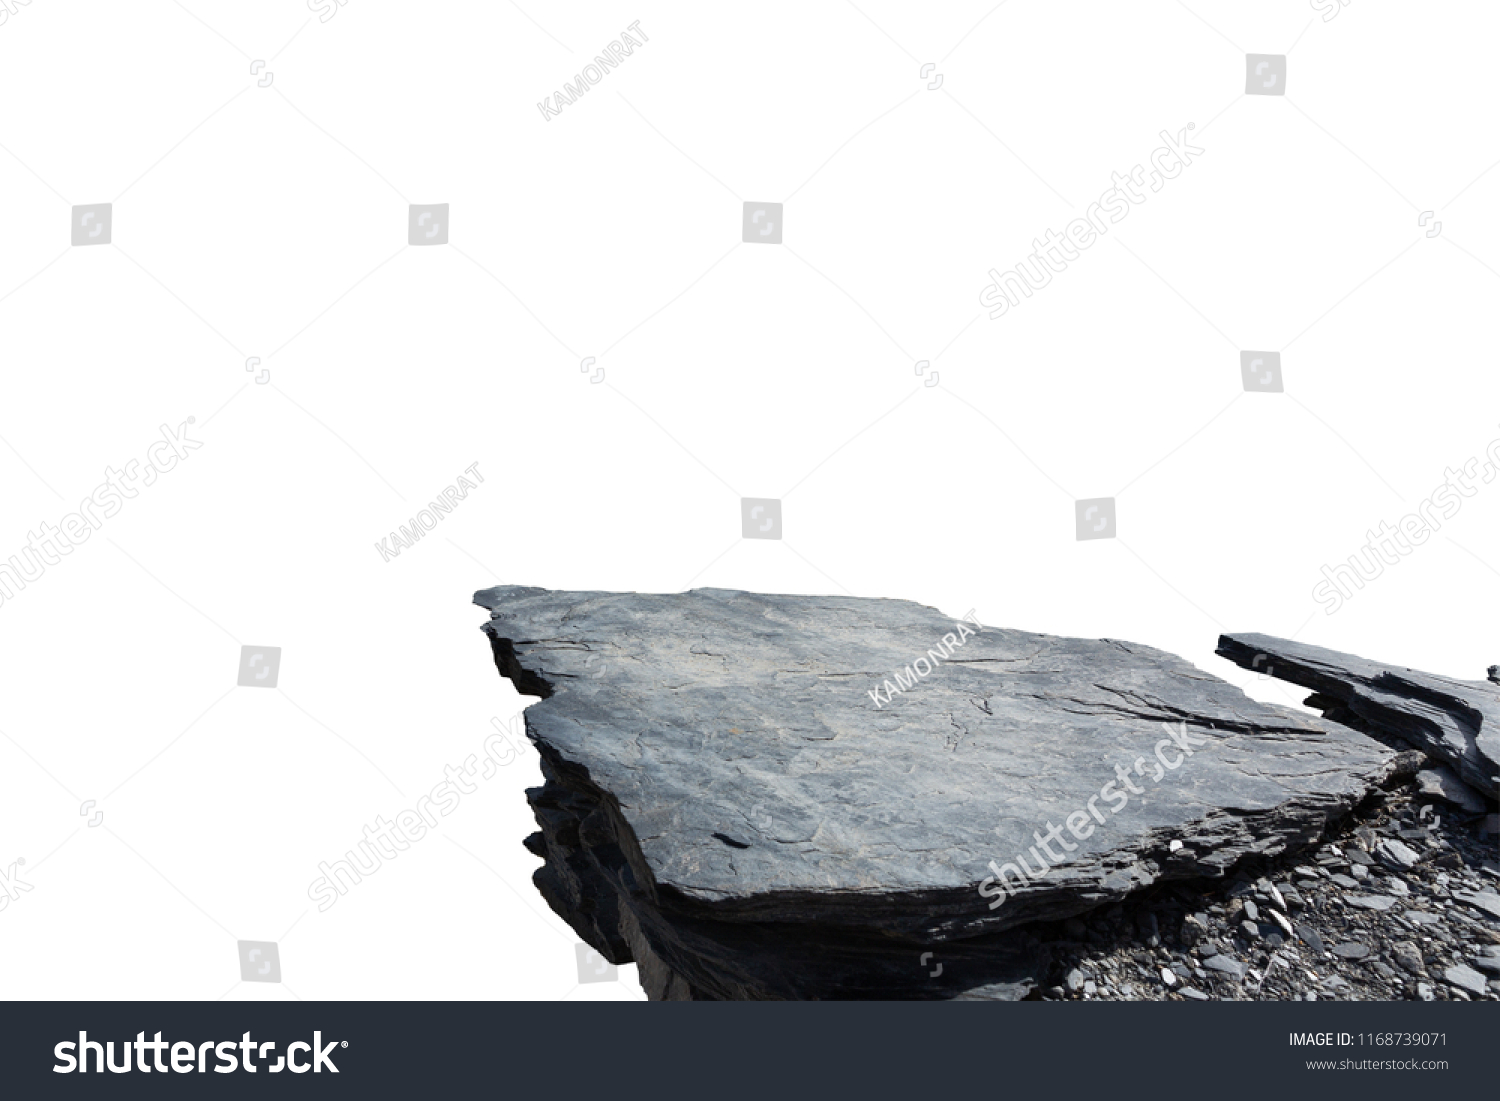 Cliff stone located part of the mountain rock isolated on white background. #1168739071